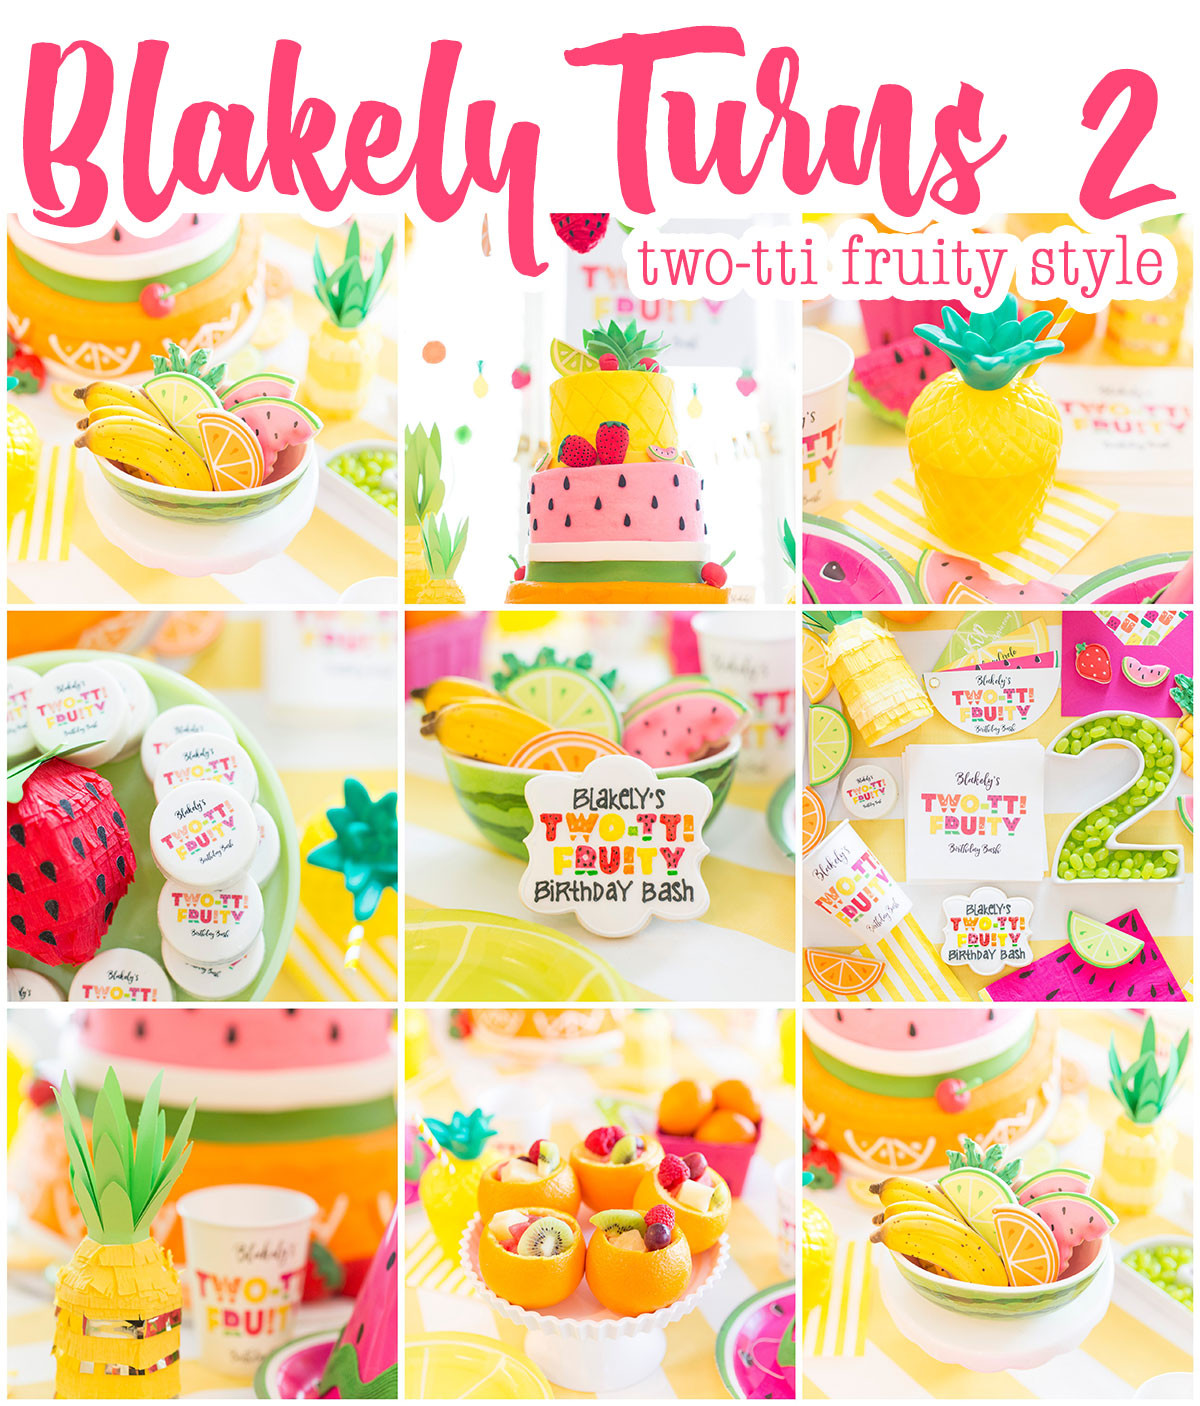 2 Yr Old Girl Birthday Party Ideas
 Two tti Fruity Birthday Party Blakely Turns 2